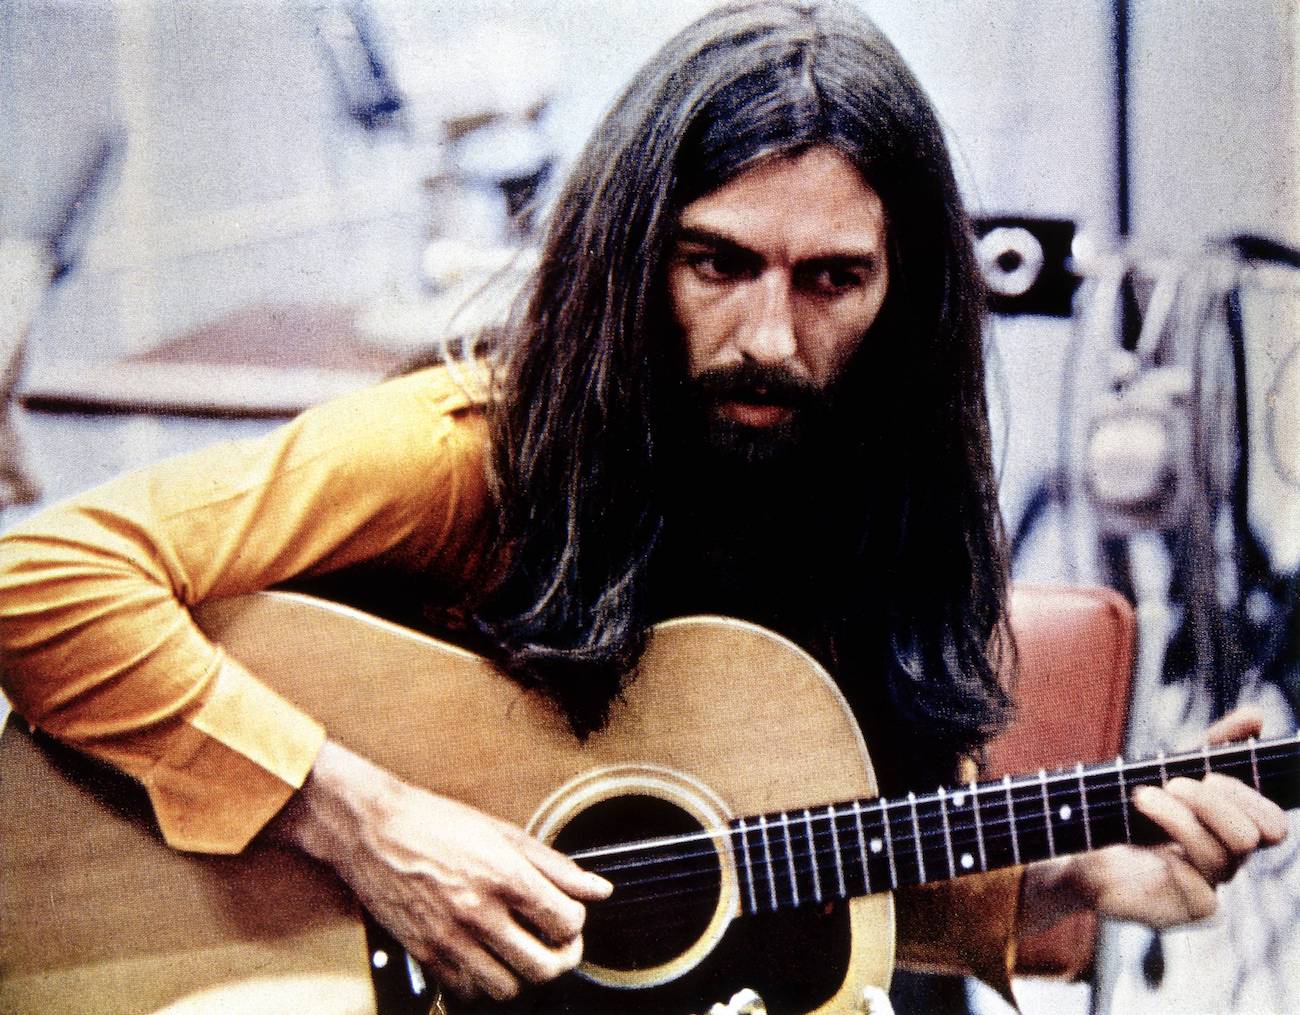 George Harrison playing the guitar in the recording studio in 1970.